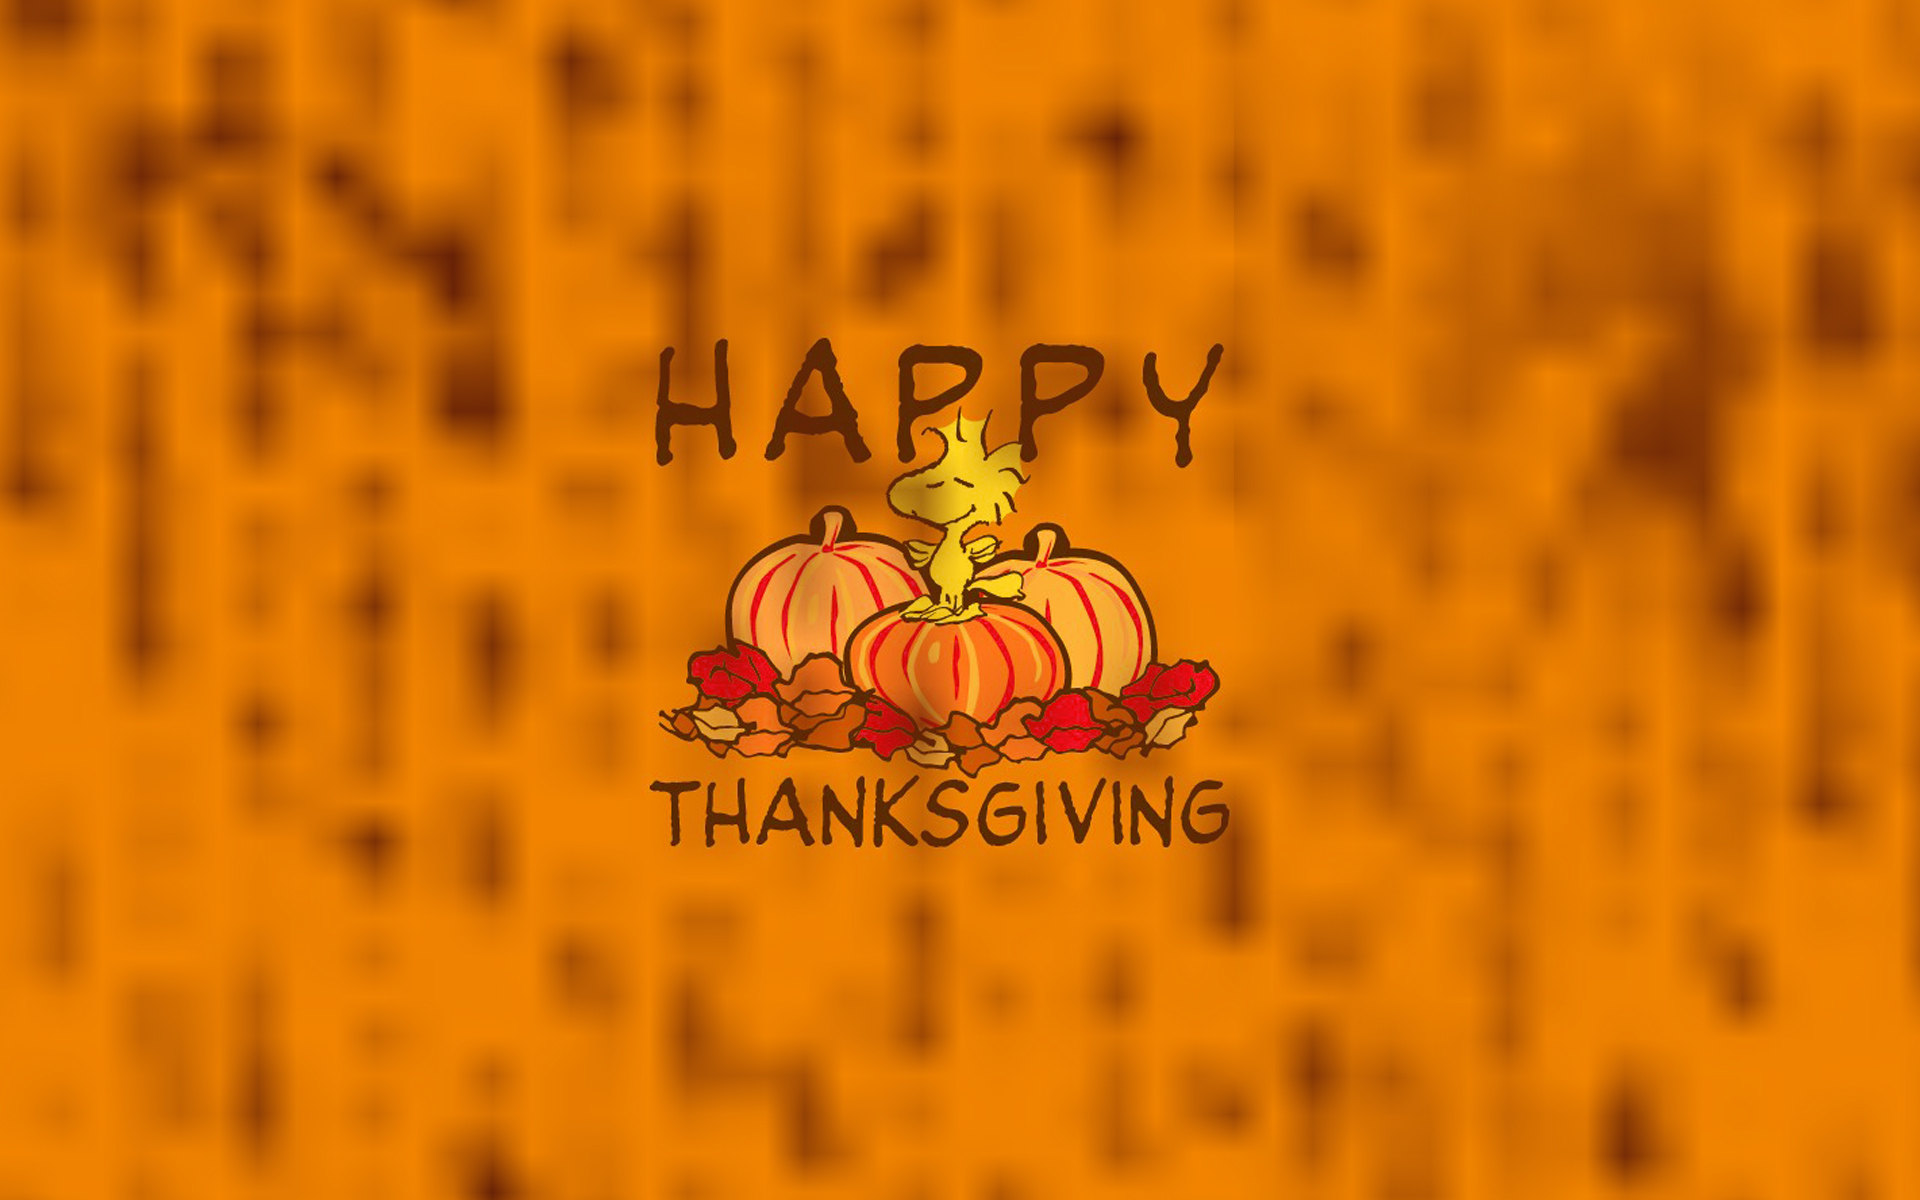 Thanksgiving background with pumpkins and leaves - Thanksgiving